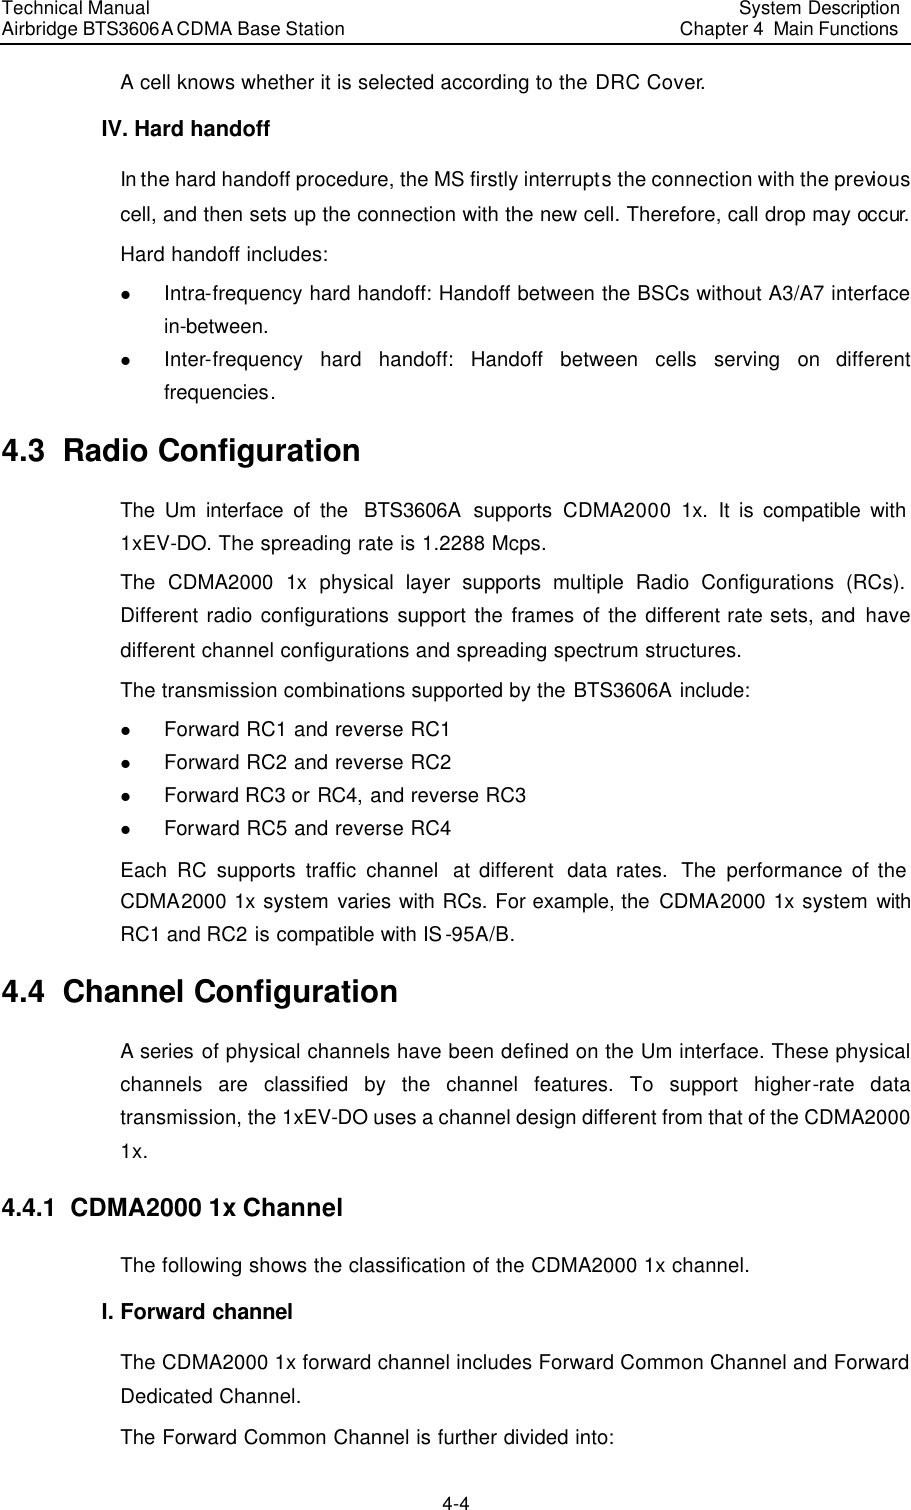 Technical Manual Airbridge BTS3606A CDMA Base Station System Description Chapter 4  Main Functions   4-4 A cell knows whether it is selected according to the DRC Cover. IV. Hard handoff In the hard handoff procedure, the MS firstly interrupts the connection with the previous cell, and then sets up the connection with the new cell. Therefore, call drop may occur. Hard handoff includes: l Intra-frequency hard handoff: Handoff between the BSCs without A3/A7 interface in-between.  l Inter-frequency hard handoff: Handoff between cells serving on different frequencies.  4.3  Radio Configuration The Um interface of the  BTS3606A supports CDMA2000 1x. It is compatible with 1xEV-DO. The spreading rate is 1.2288 Mcps. The CDMA2000 1x physical layer supports multiple Radio Configurations (RCs). Different radio configurations support the frames of the different rate sets, and have different channel configurations and spreading spectrum structures. The transmission combinations supported by the BTS3606A include:  l Forward RC1 and reverse RC1 l Forward RC2 and reverse RC2 l Forward RC3 or RC4, and reverse RC3 l Forward RC5 and reverse RC4 Each RC supports traffic channel  at different  data rates.  The  performance of the CDMA2000 1x system varies with RCs. For example, the CDMA2000 1x system with RC1 and RC2 is compatible with IS-95A/B.  4.4  Channel Configuration  A series of physical channels have been defined on the Um interface. These physical channels are classified by the channel features. To support higher-rate data transmission, the 1xEV-DO uses a channel design different from that of the CDMA2000 1x. 4.4.1  CDMA2000 1x Channel The following shows the classification of the CDMA2000 1x channel. I. Forward channel  The CDMA2000 1x forward channel includes Forward Common Channel and Forward Dedicated Channel. The Forward Common Channel is further divided into: 